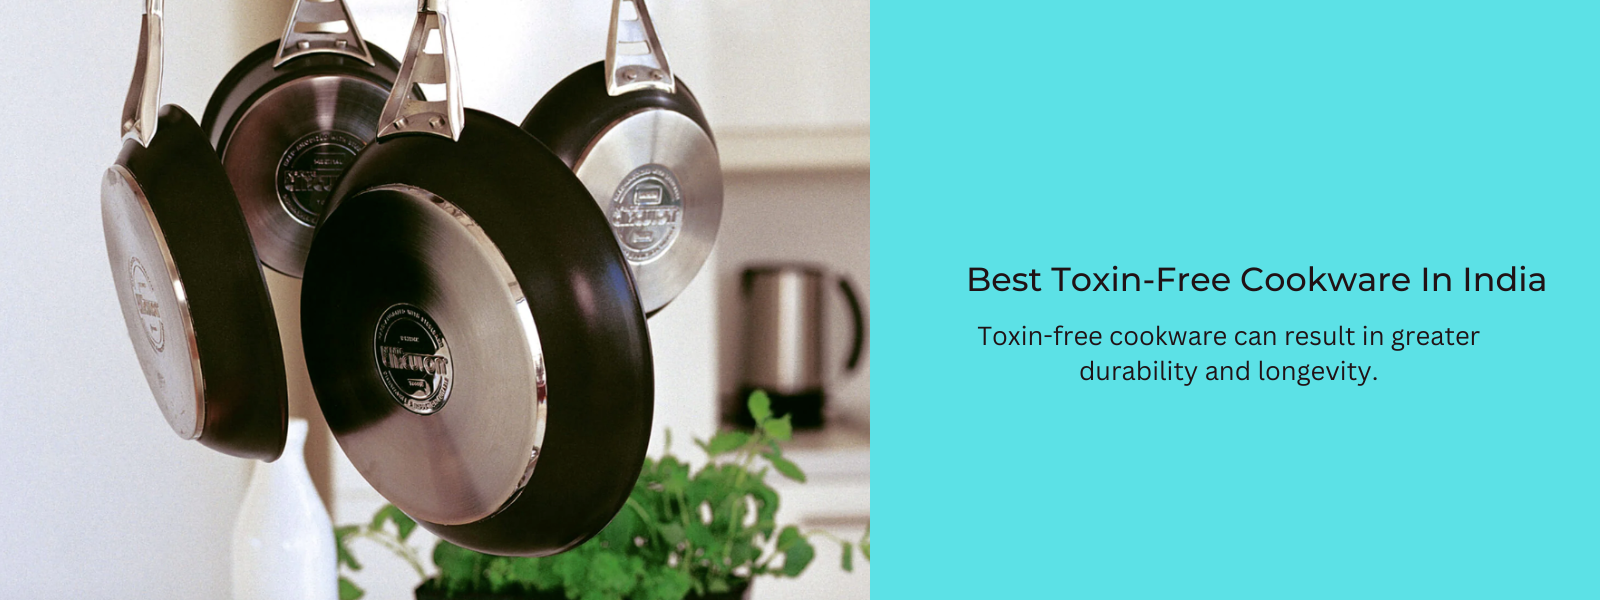 Non Stick Dosa Pan Price: Best Toxin-Free Cookware